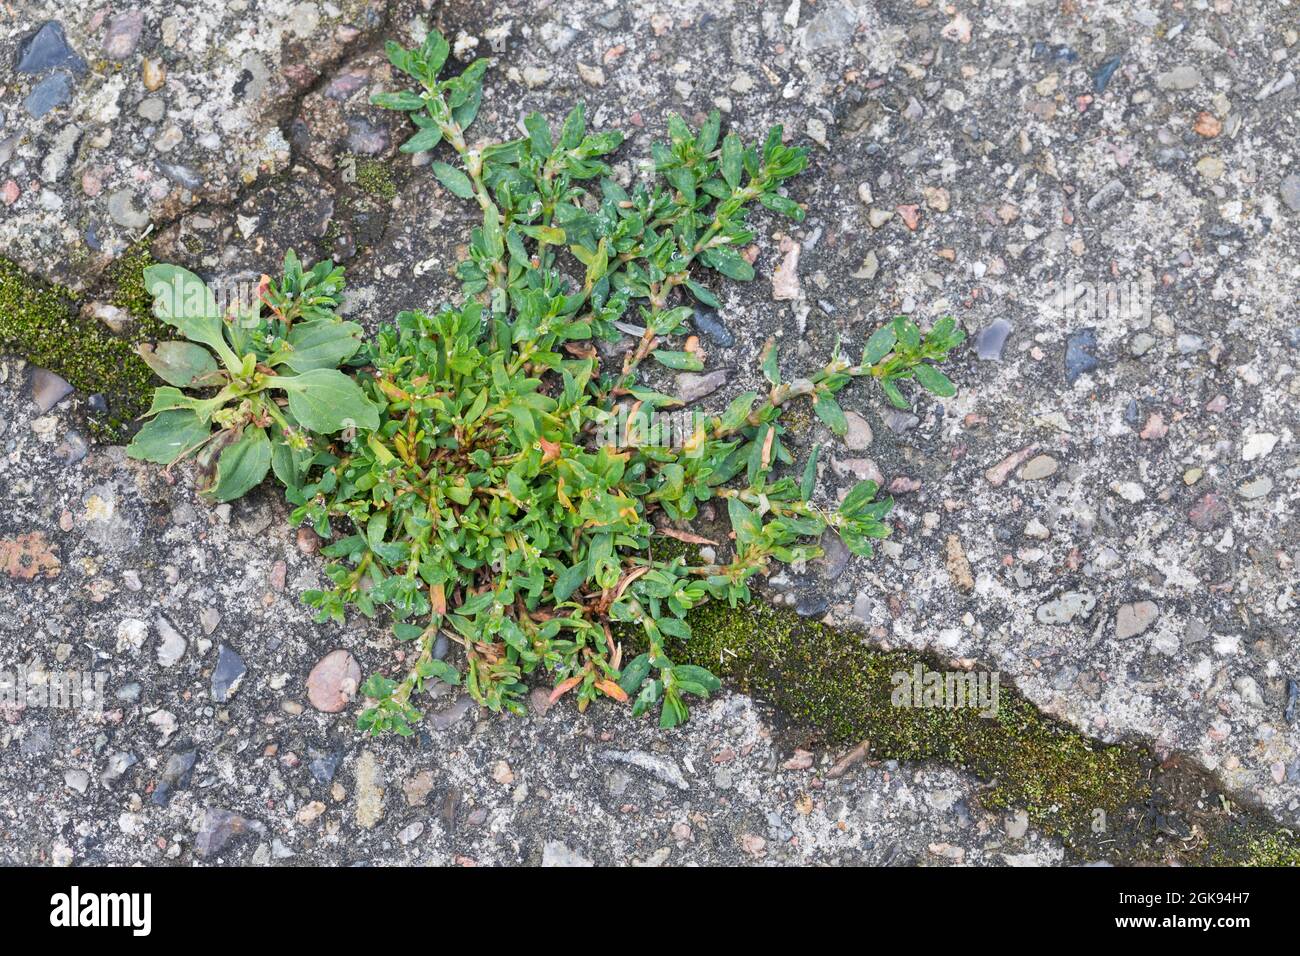 Small-leaved knotgrass, Oval-leaf knotweed (Polygonum arenastrum, Polygonum aviculare ssp. arenastrum), on a pavement with plantain, Plantago major, Stock Photo